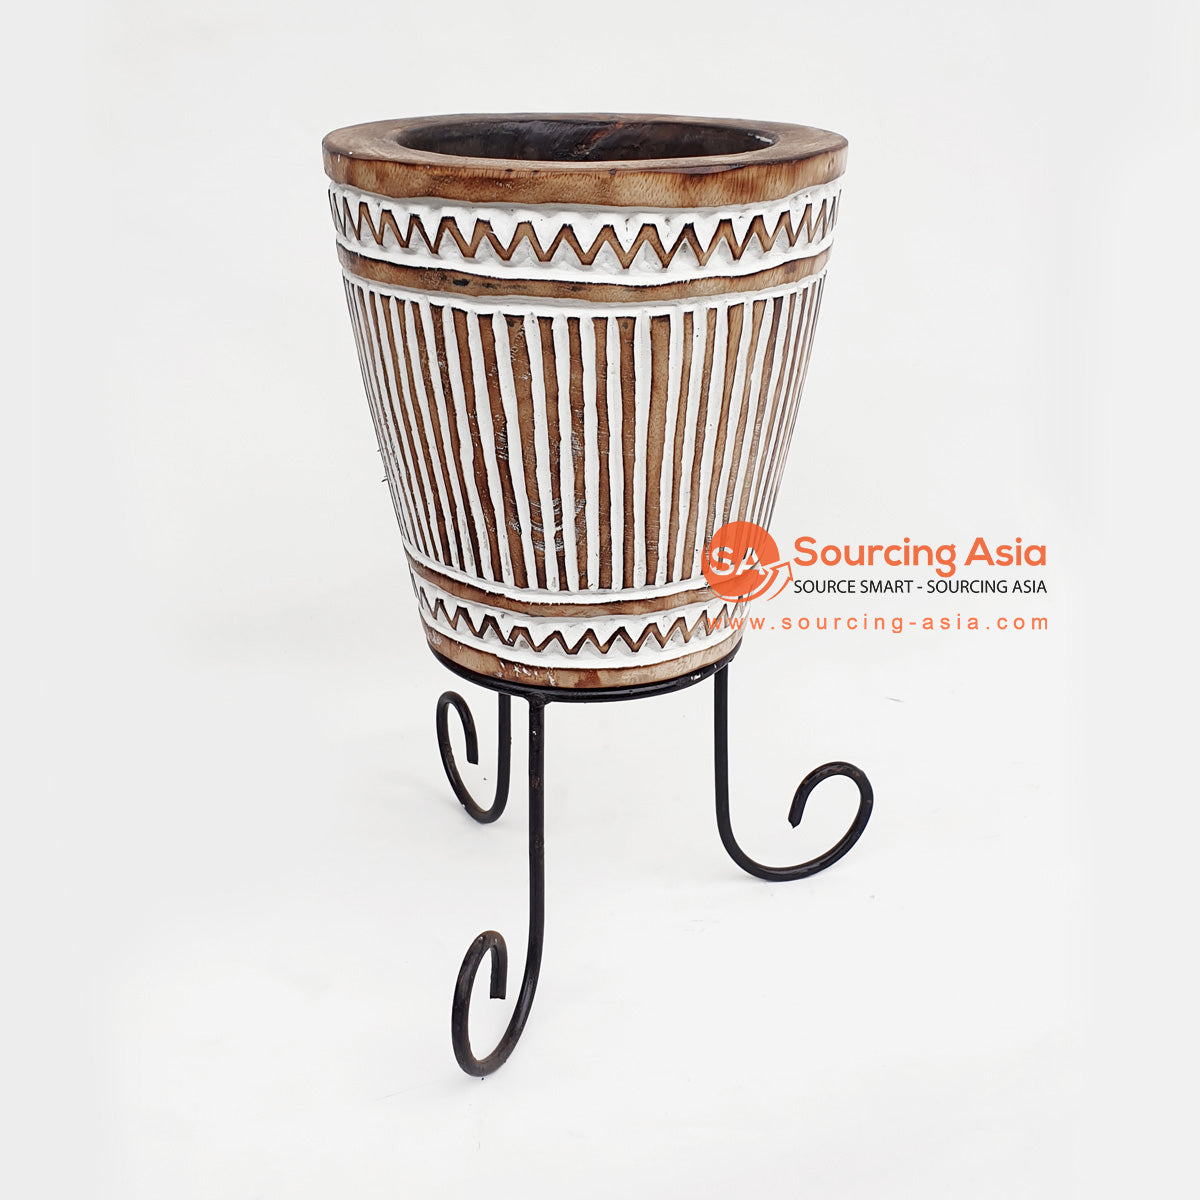 DGPC035-1 BROWN WASH SUAR WOOD TRIBAL CARVED POT WITH METAL STAND